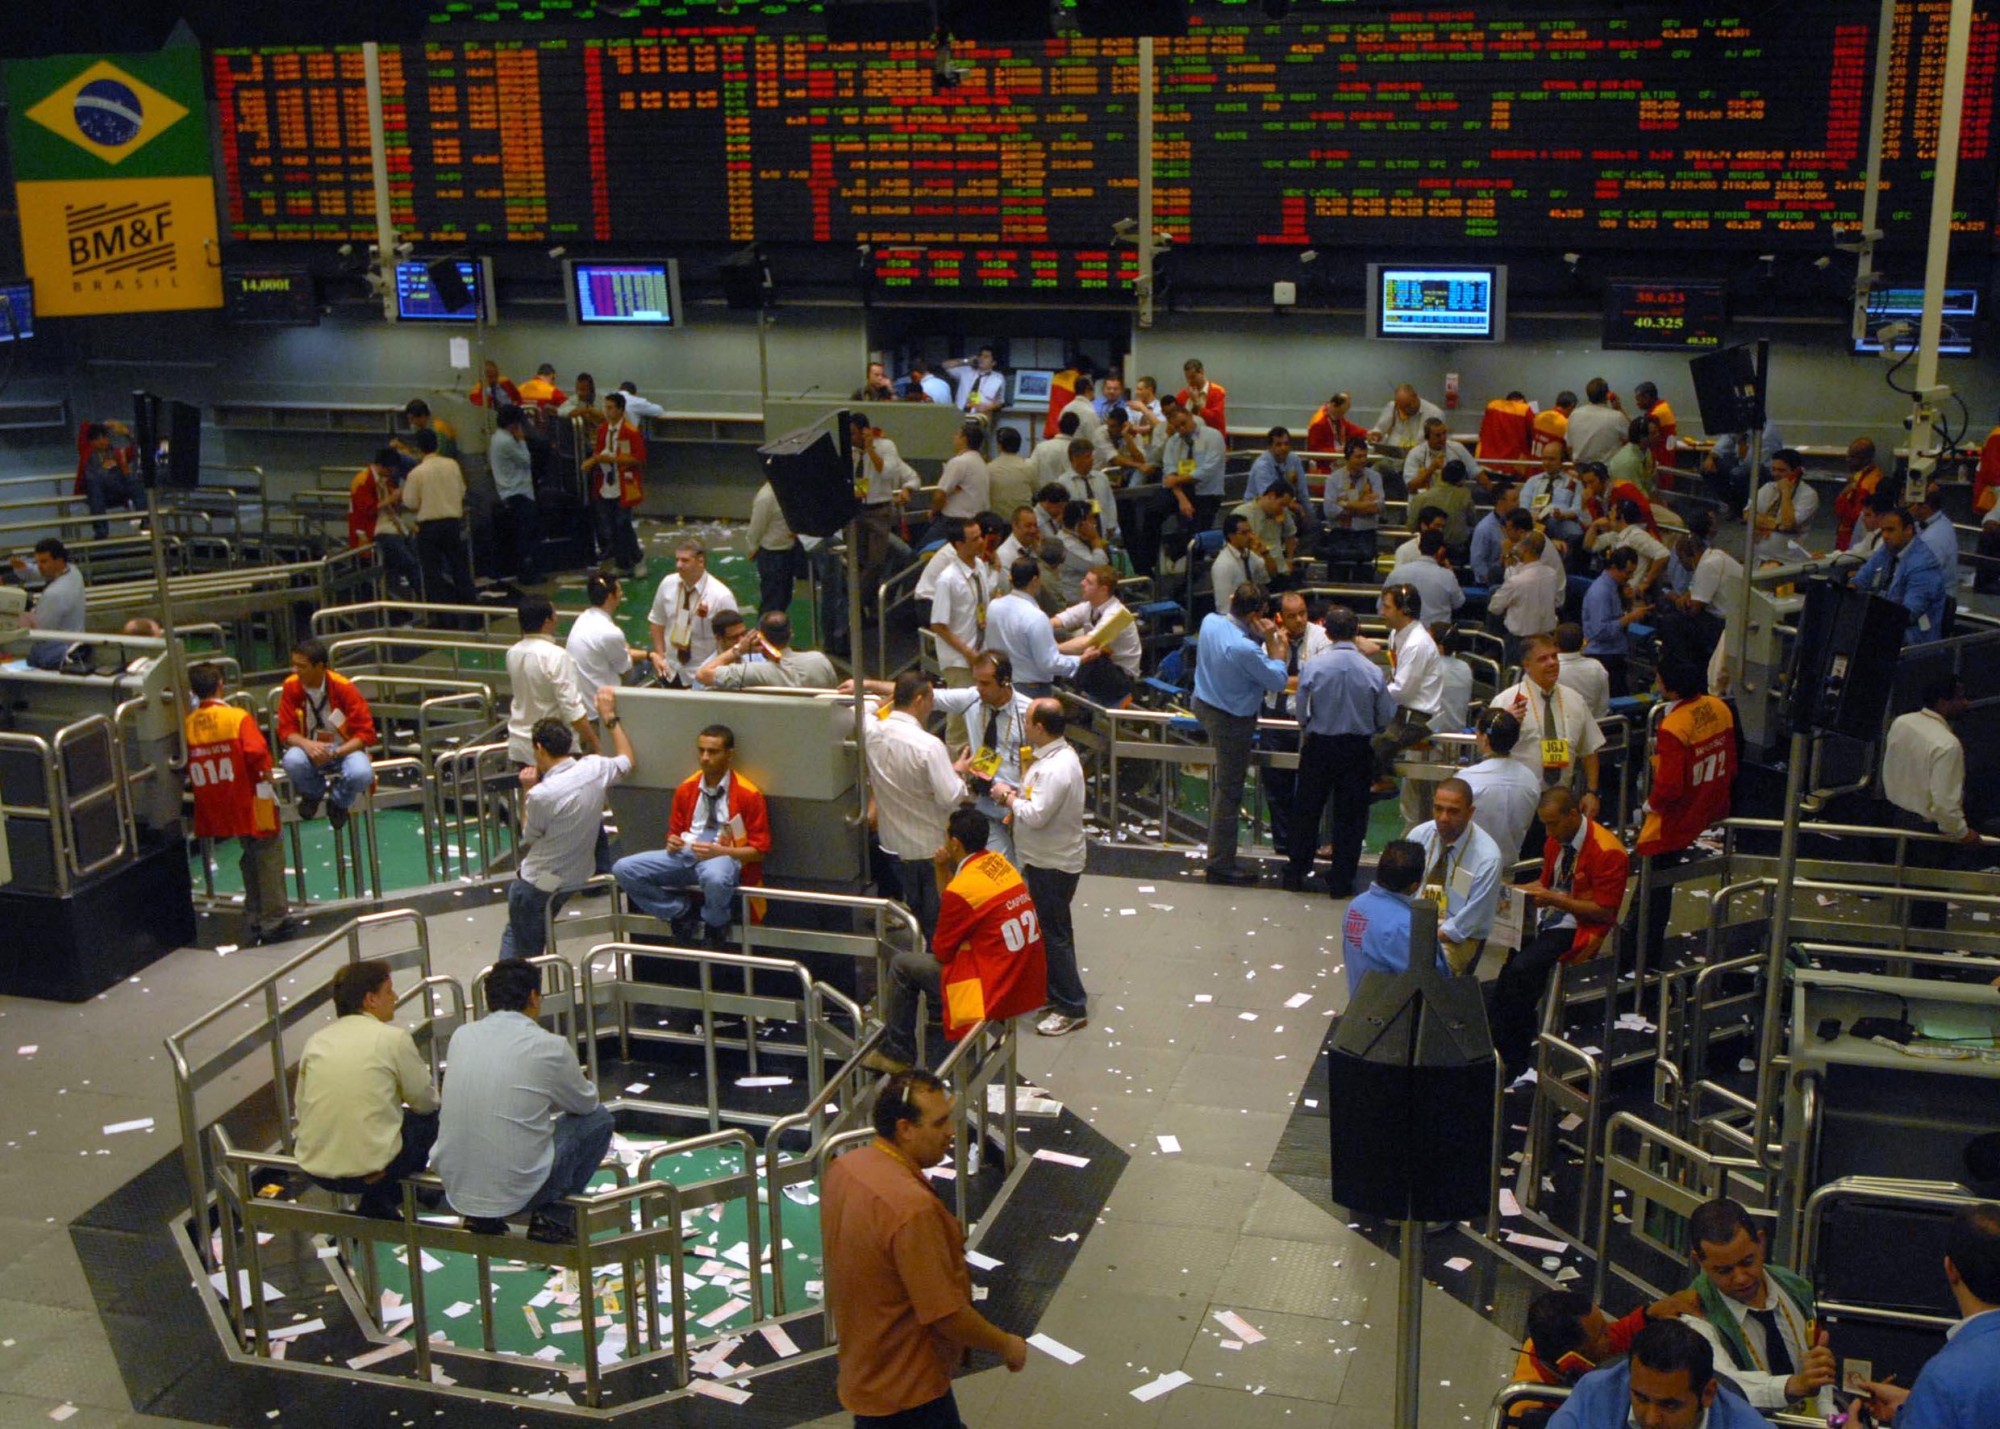 Brazil Real Falls to R$4 to US$1 and Stock Market Tumbles